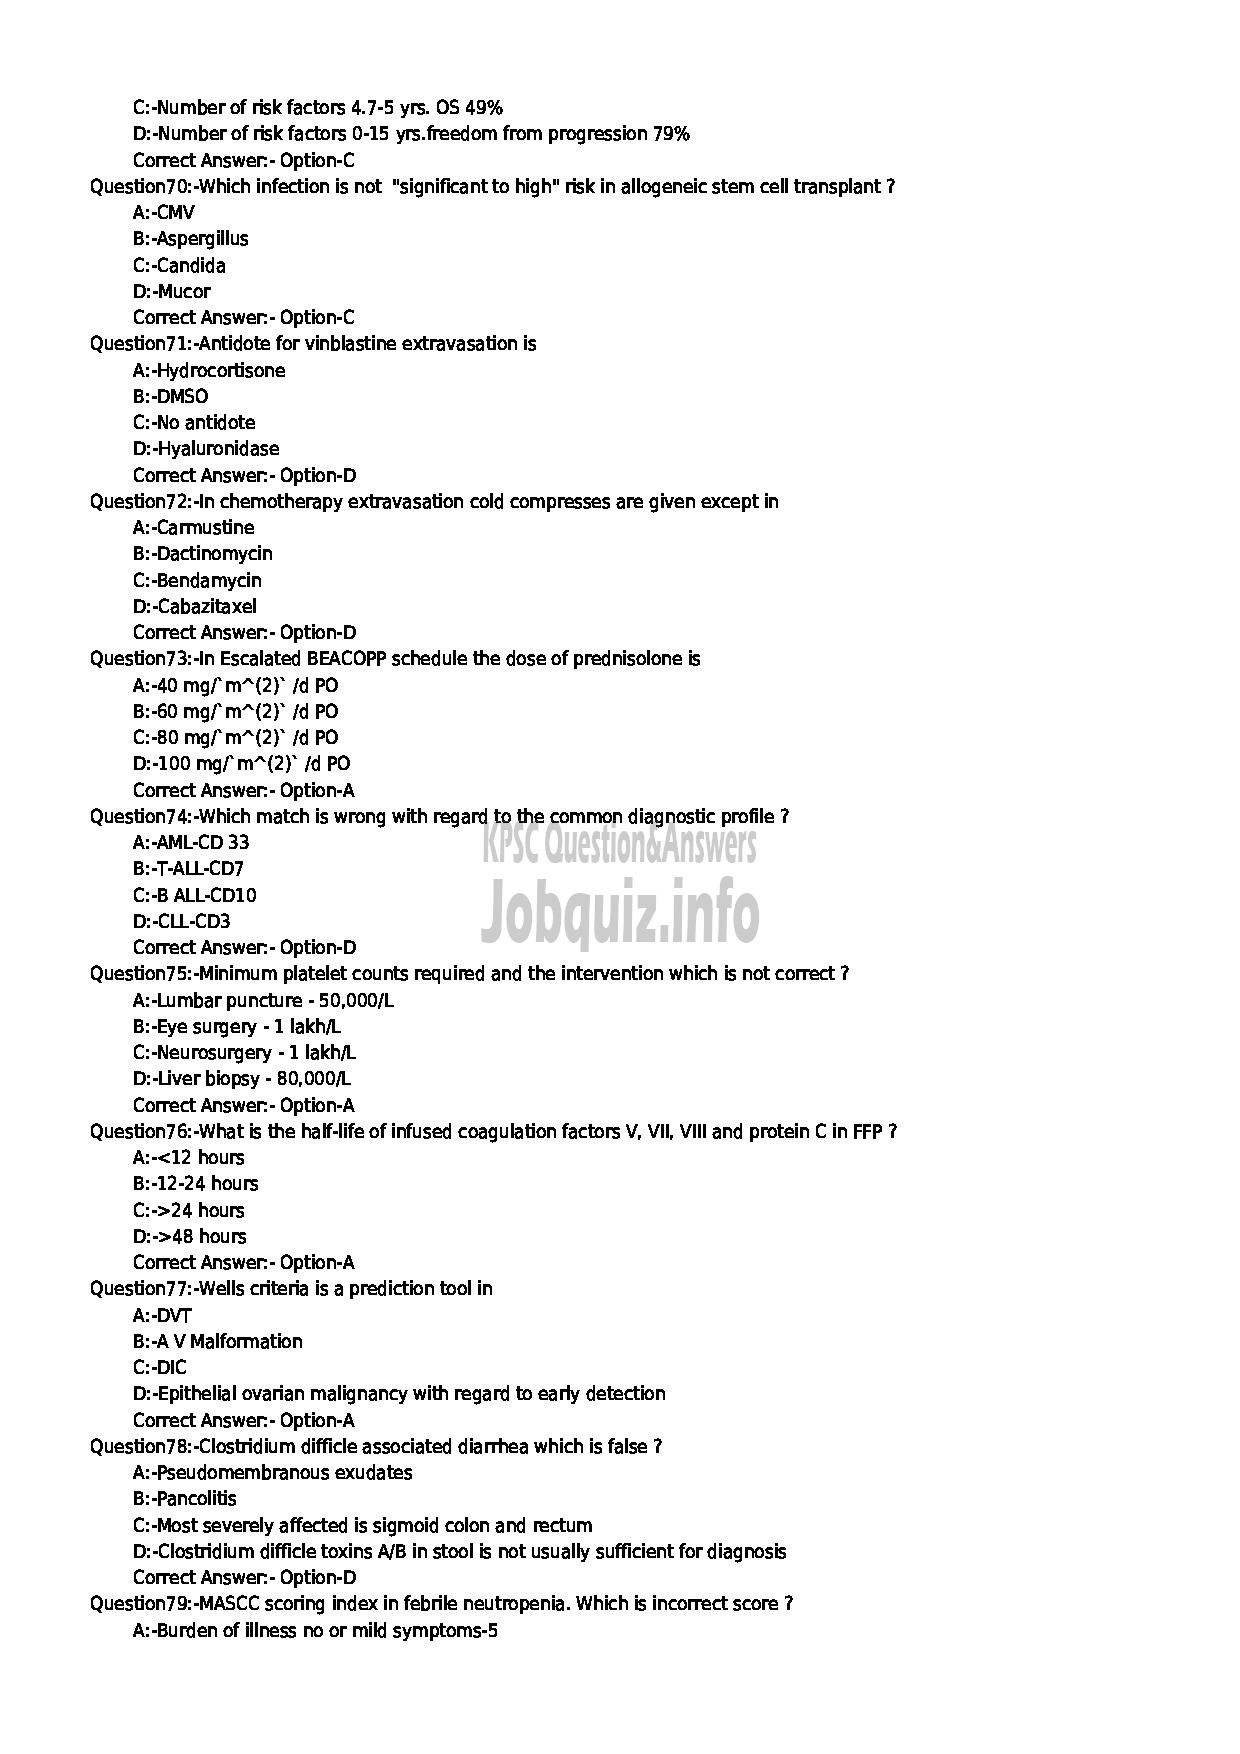 Kerala PSC Question Paper - SENIOR LECTURER IN RADIOTHERAPY NCA MEDICAL EDUCATION-9